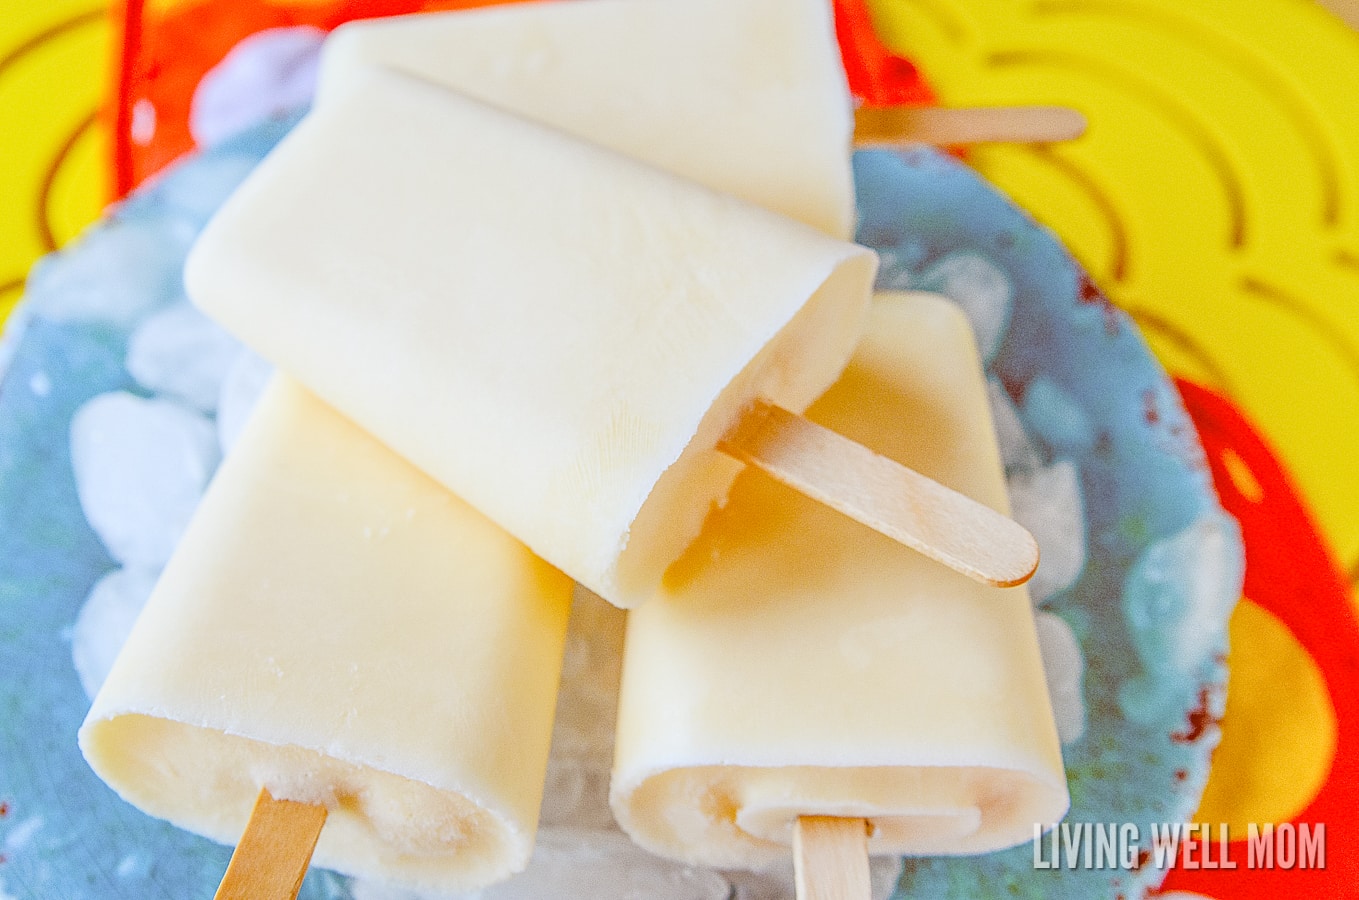 These Orange Yogurt Popsicles are unbelievably easy to make and a satisfying nutritious snack kids of all ages will love. And you’ll love how this simple recipe will fill them up, thanks to the added protein from the yogurt!